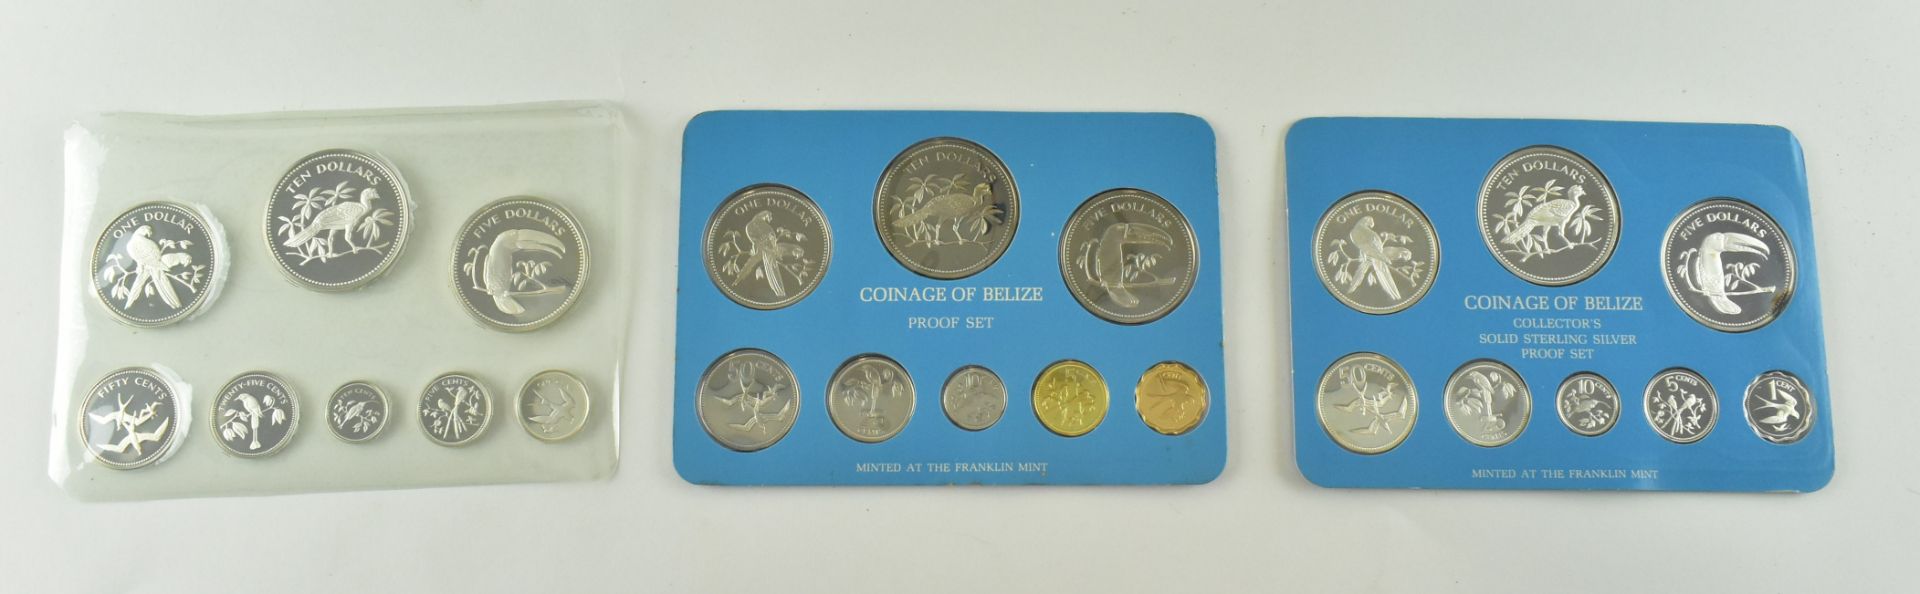 THREE BOXED FRANKLIN MINT SILVER PROOF COINAGE OF BELIZE SETS - Image 2 of 5